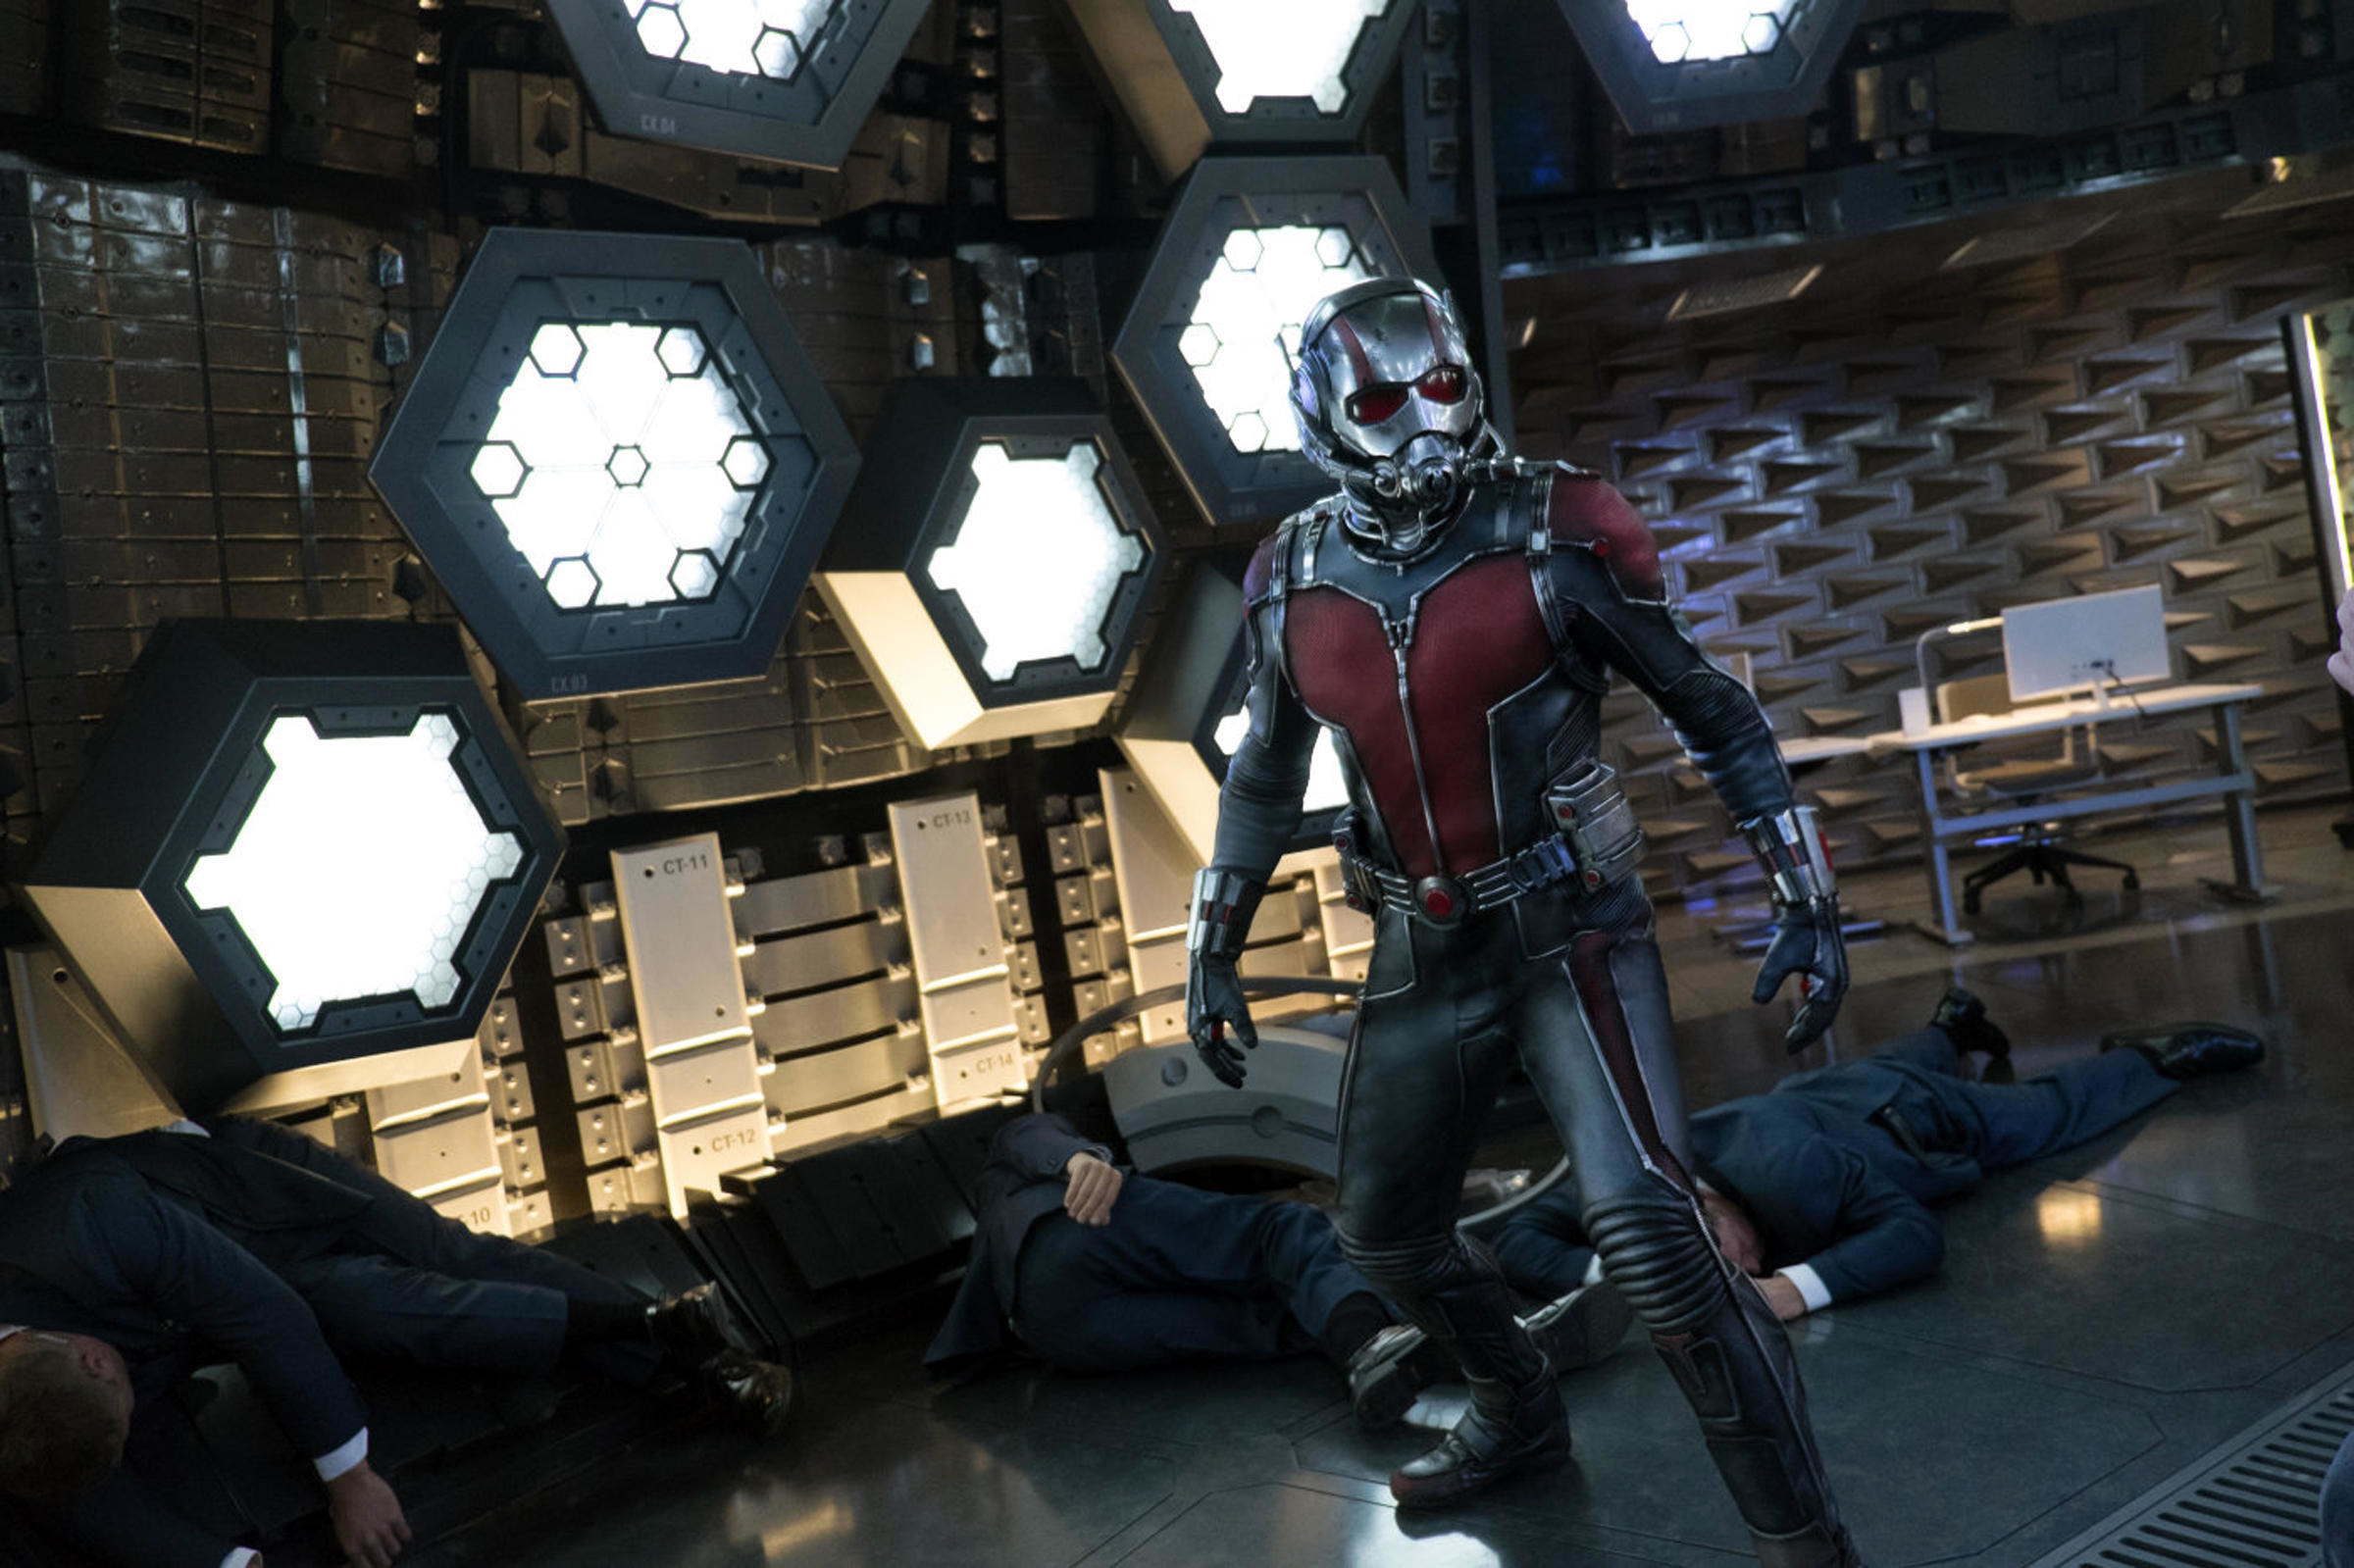 Ant-Man poses in a futuristic laboratory filled with unconscious guards